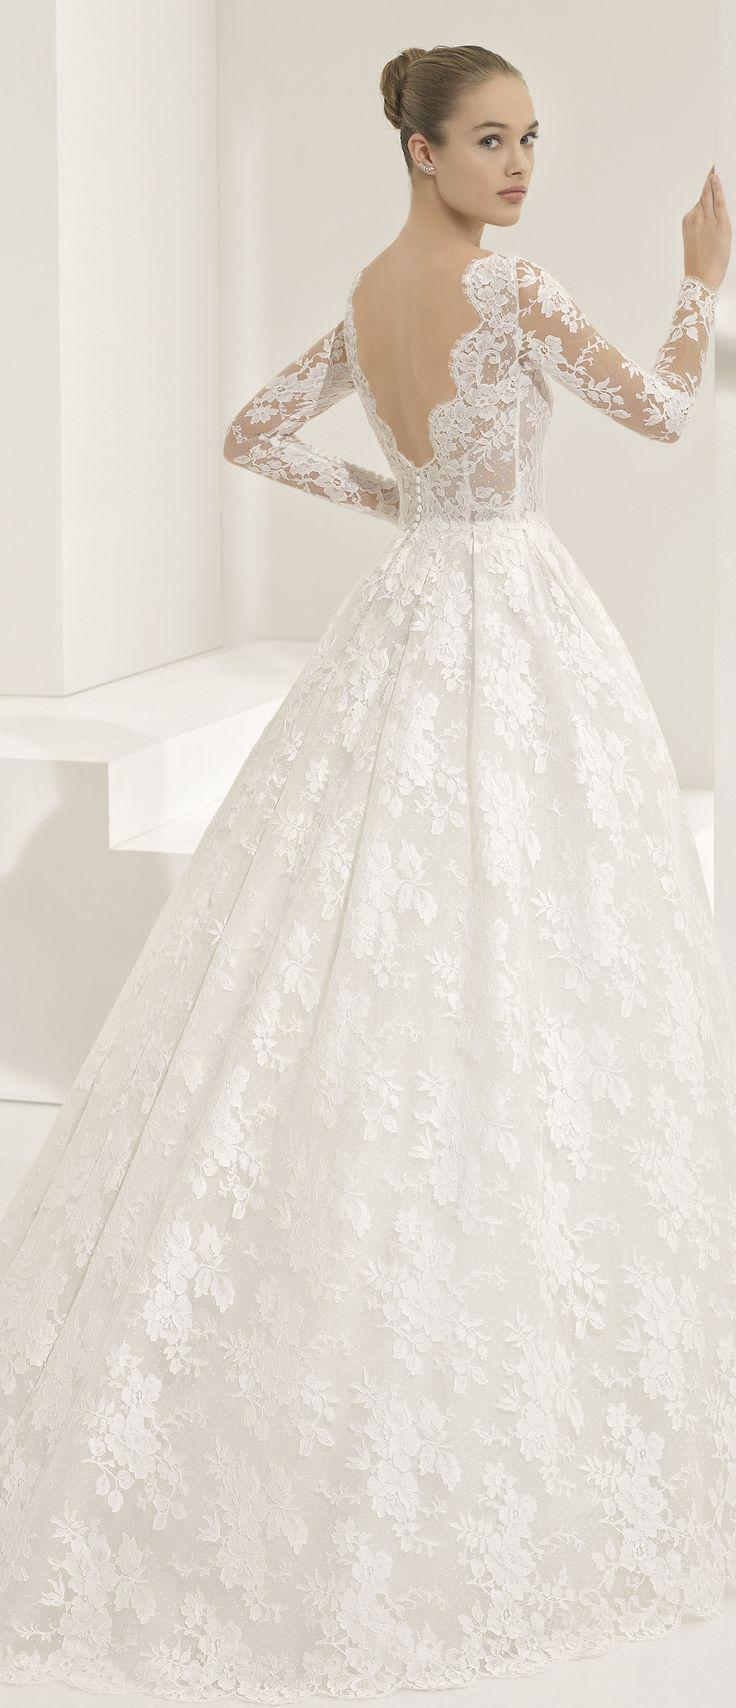 Mariage - Rosa Clará Couture 2018 Bridal Collection: A Line Up Of Stunning Statement Backs